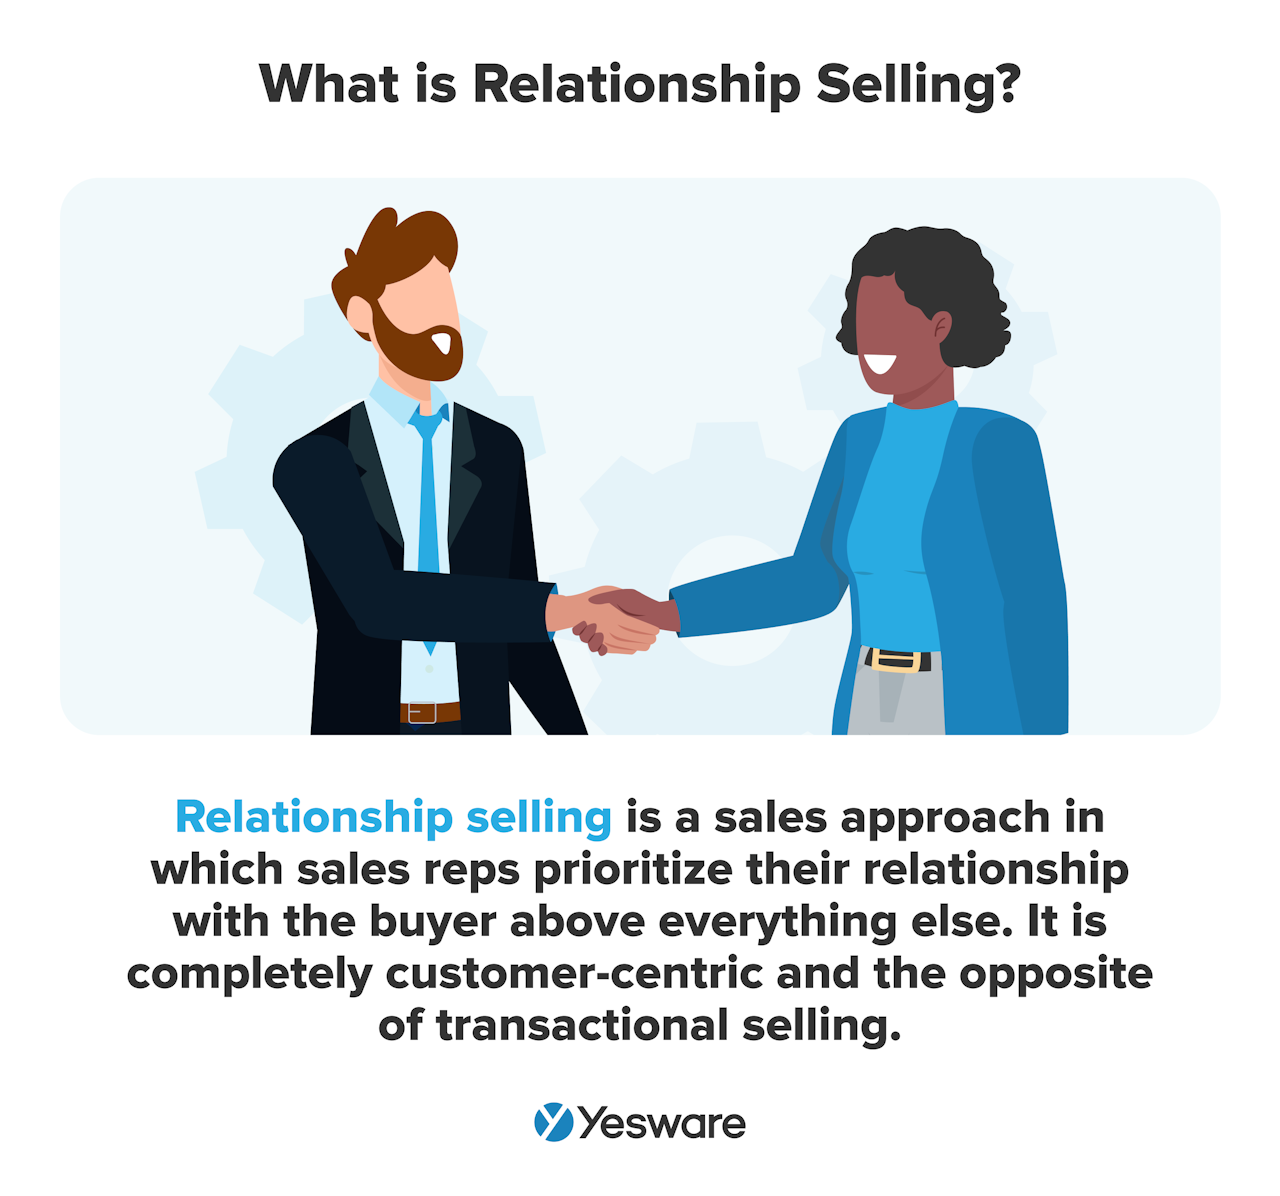 sales approach: relationship selling